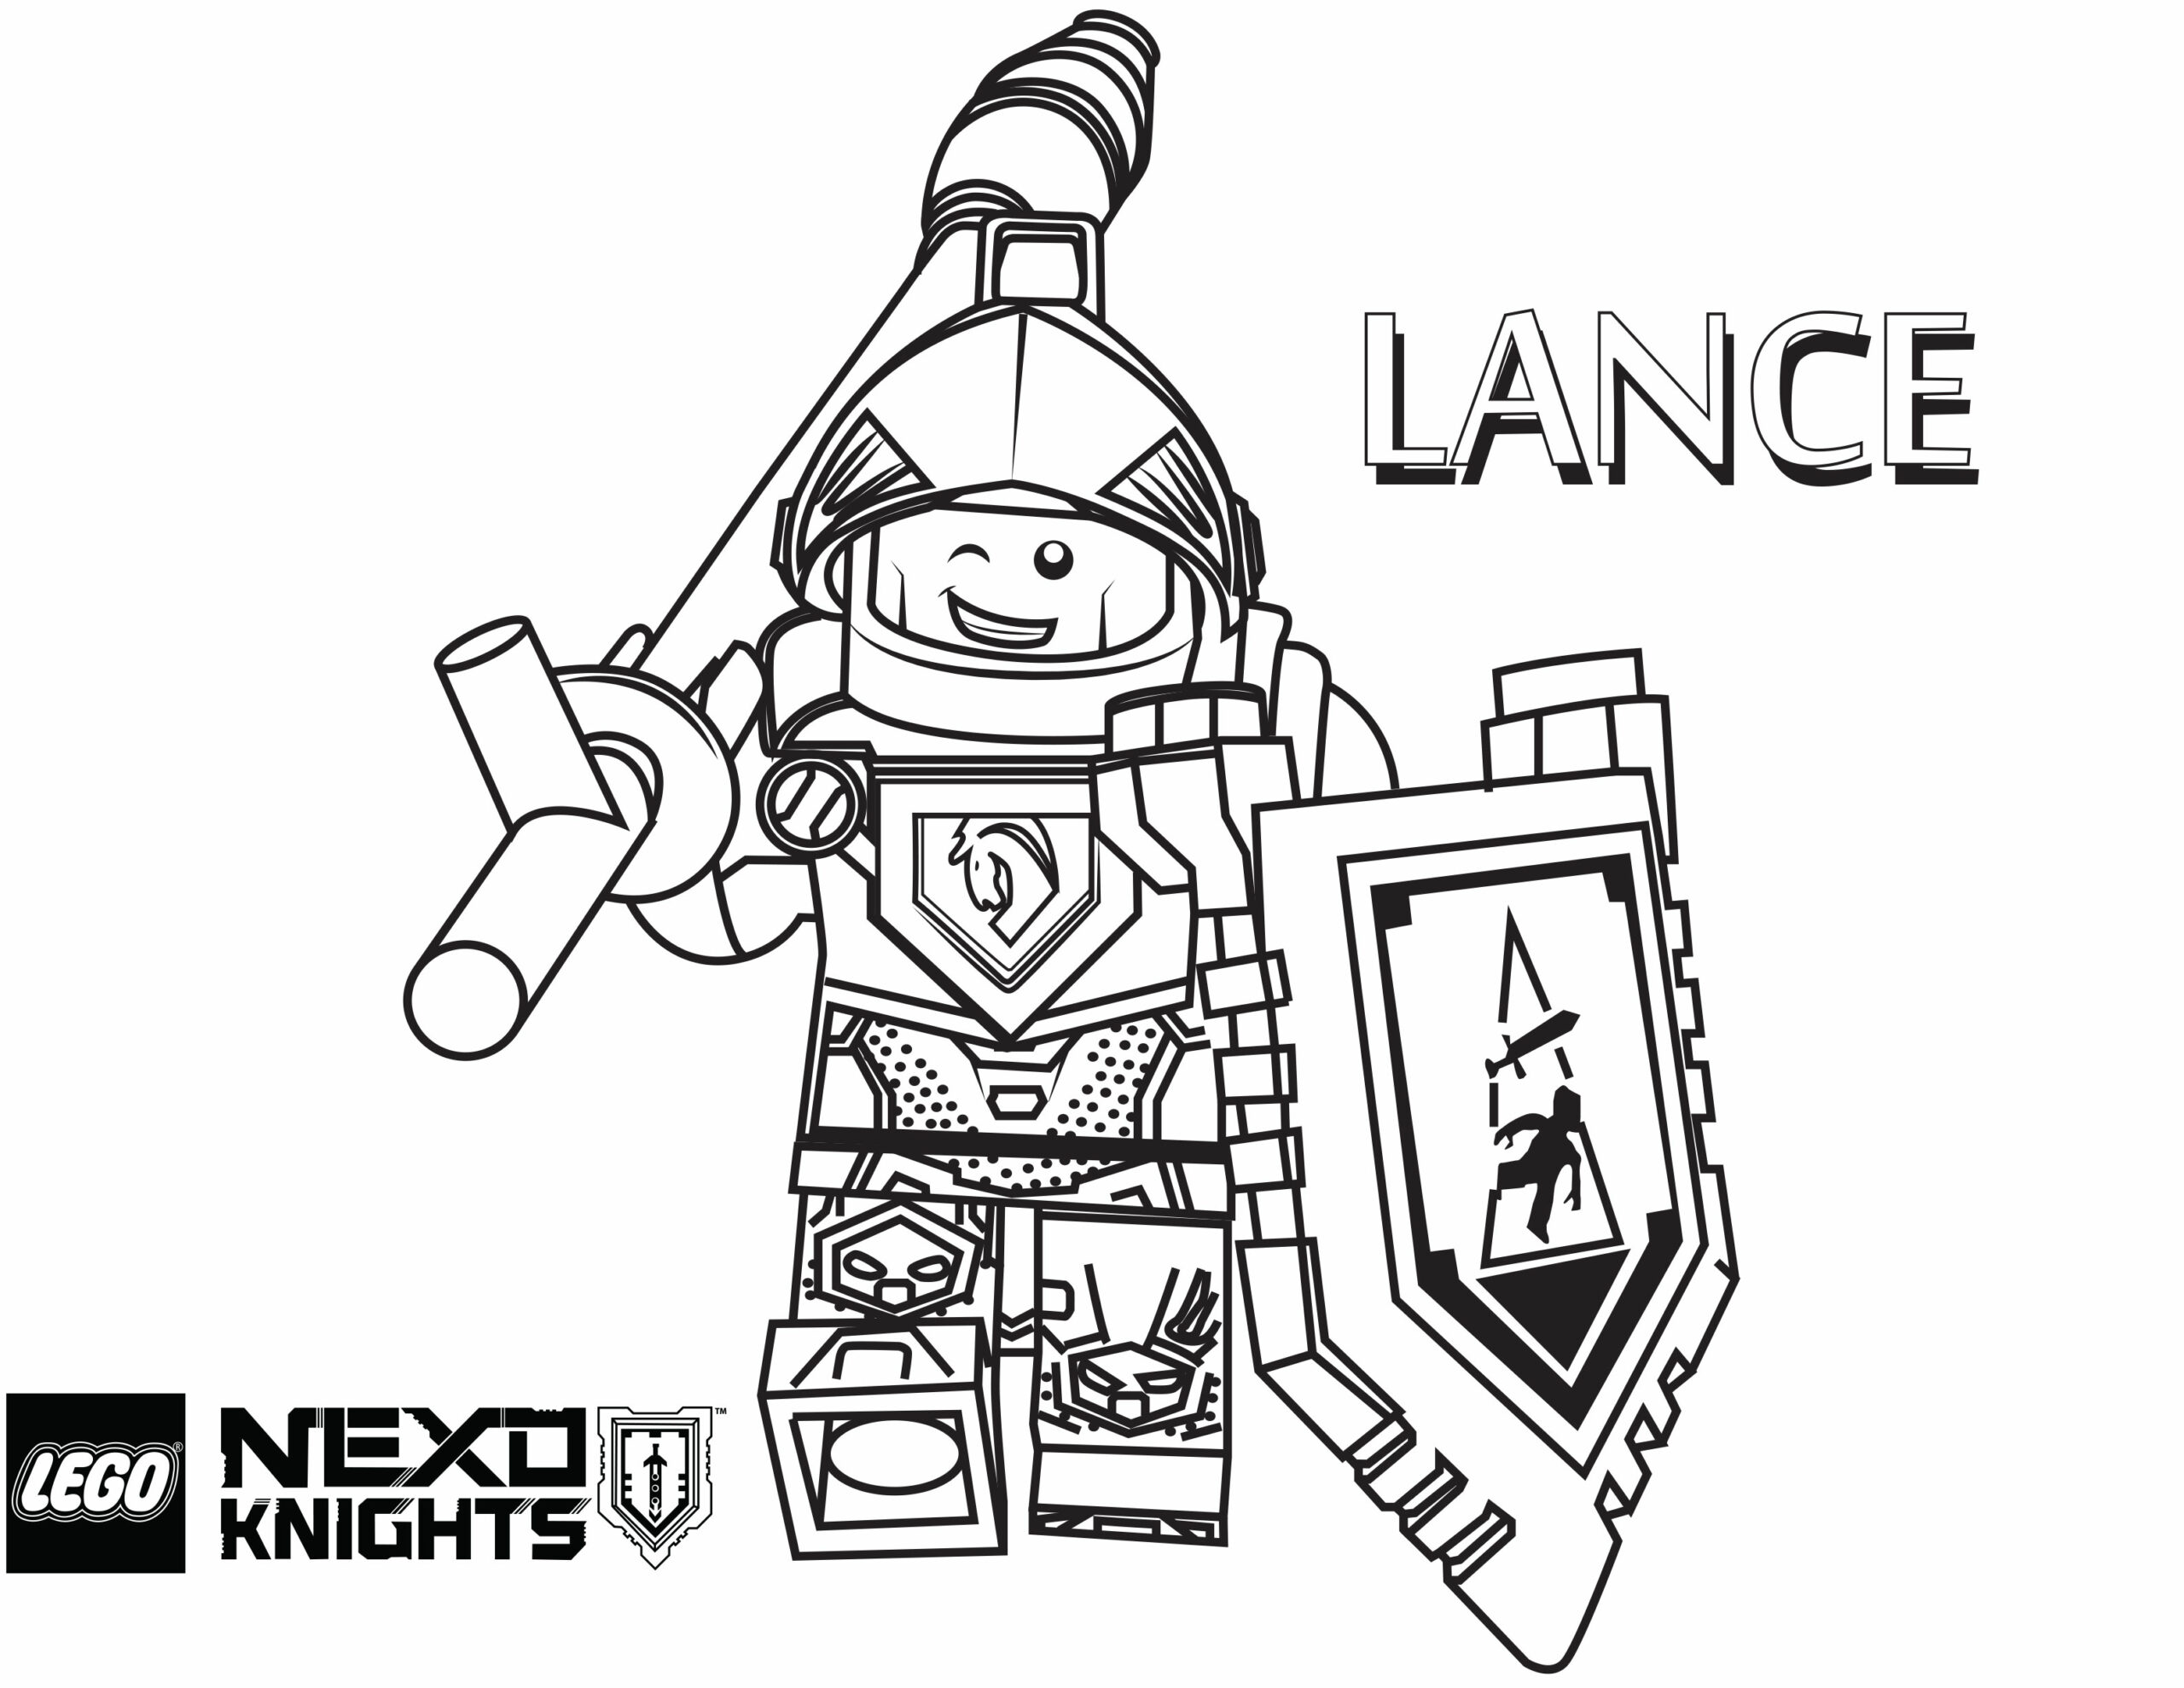 nexo knights printable coloring pages